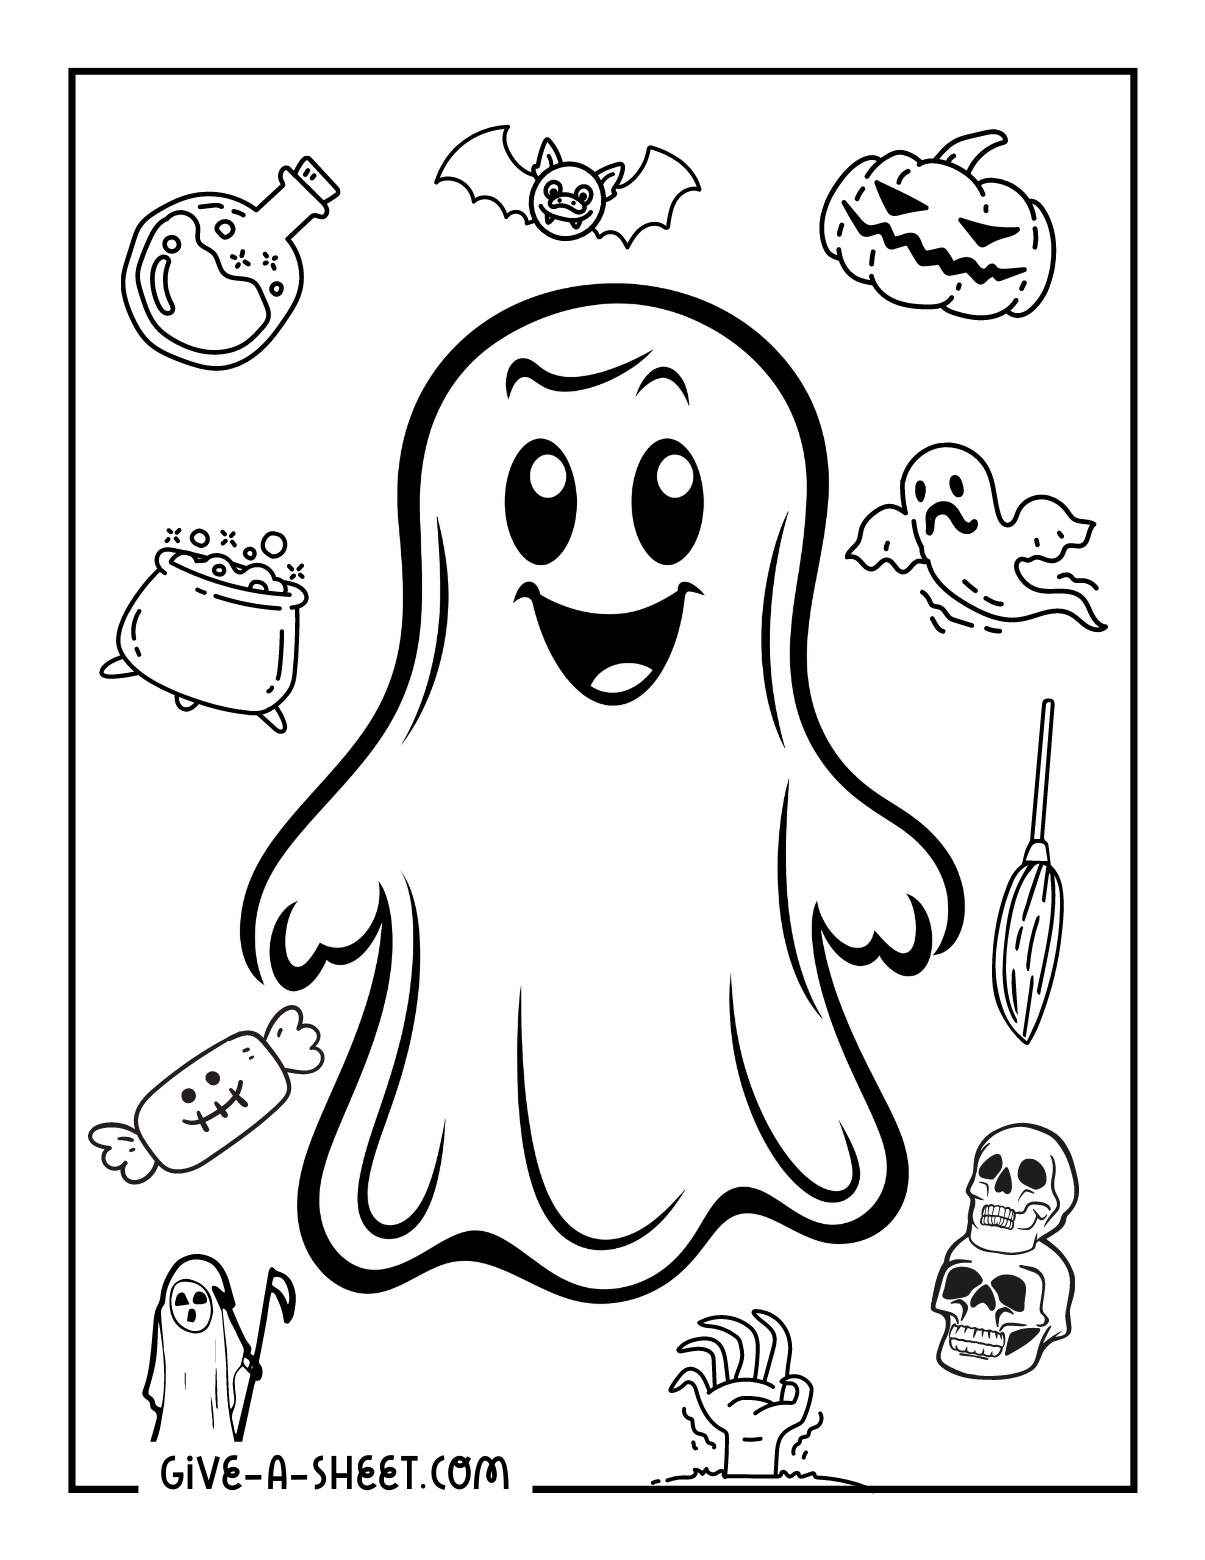 Halloween ghost coloring pages for kids.